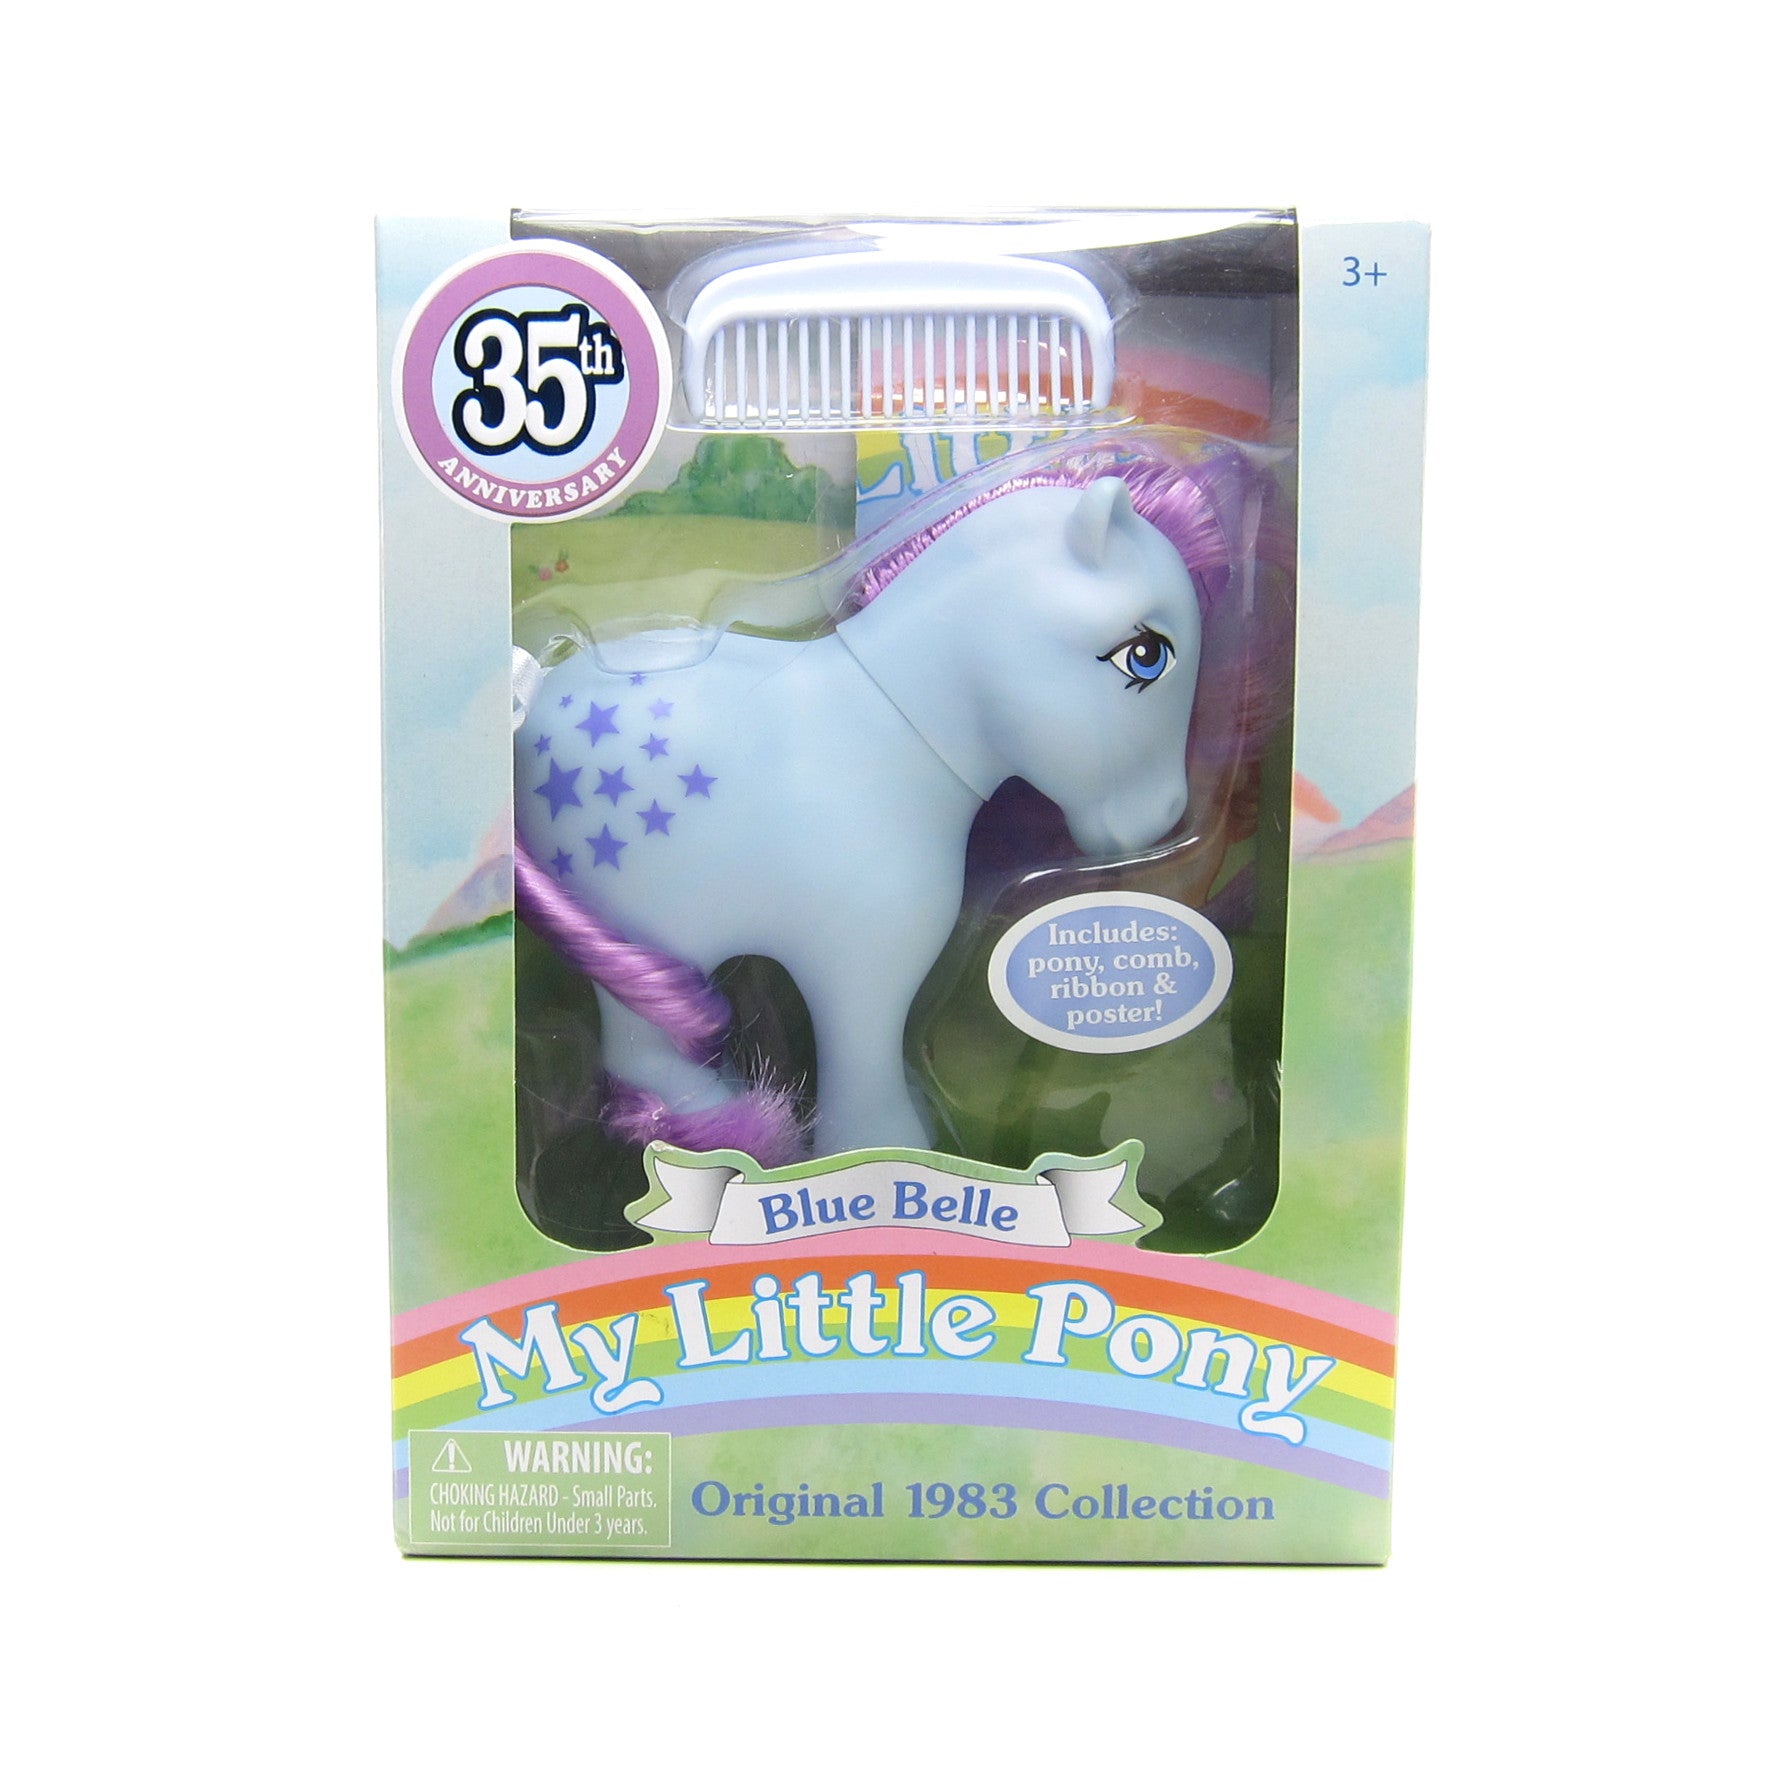 Blue Belle My Little Pony 35th Anniversary classic toy